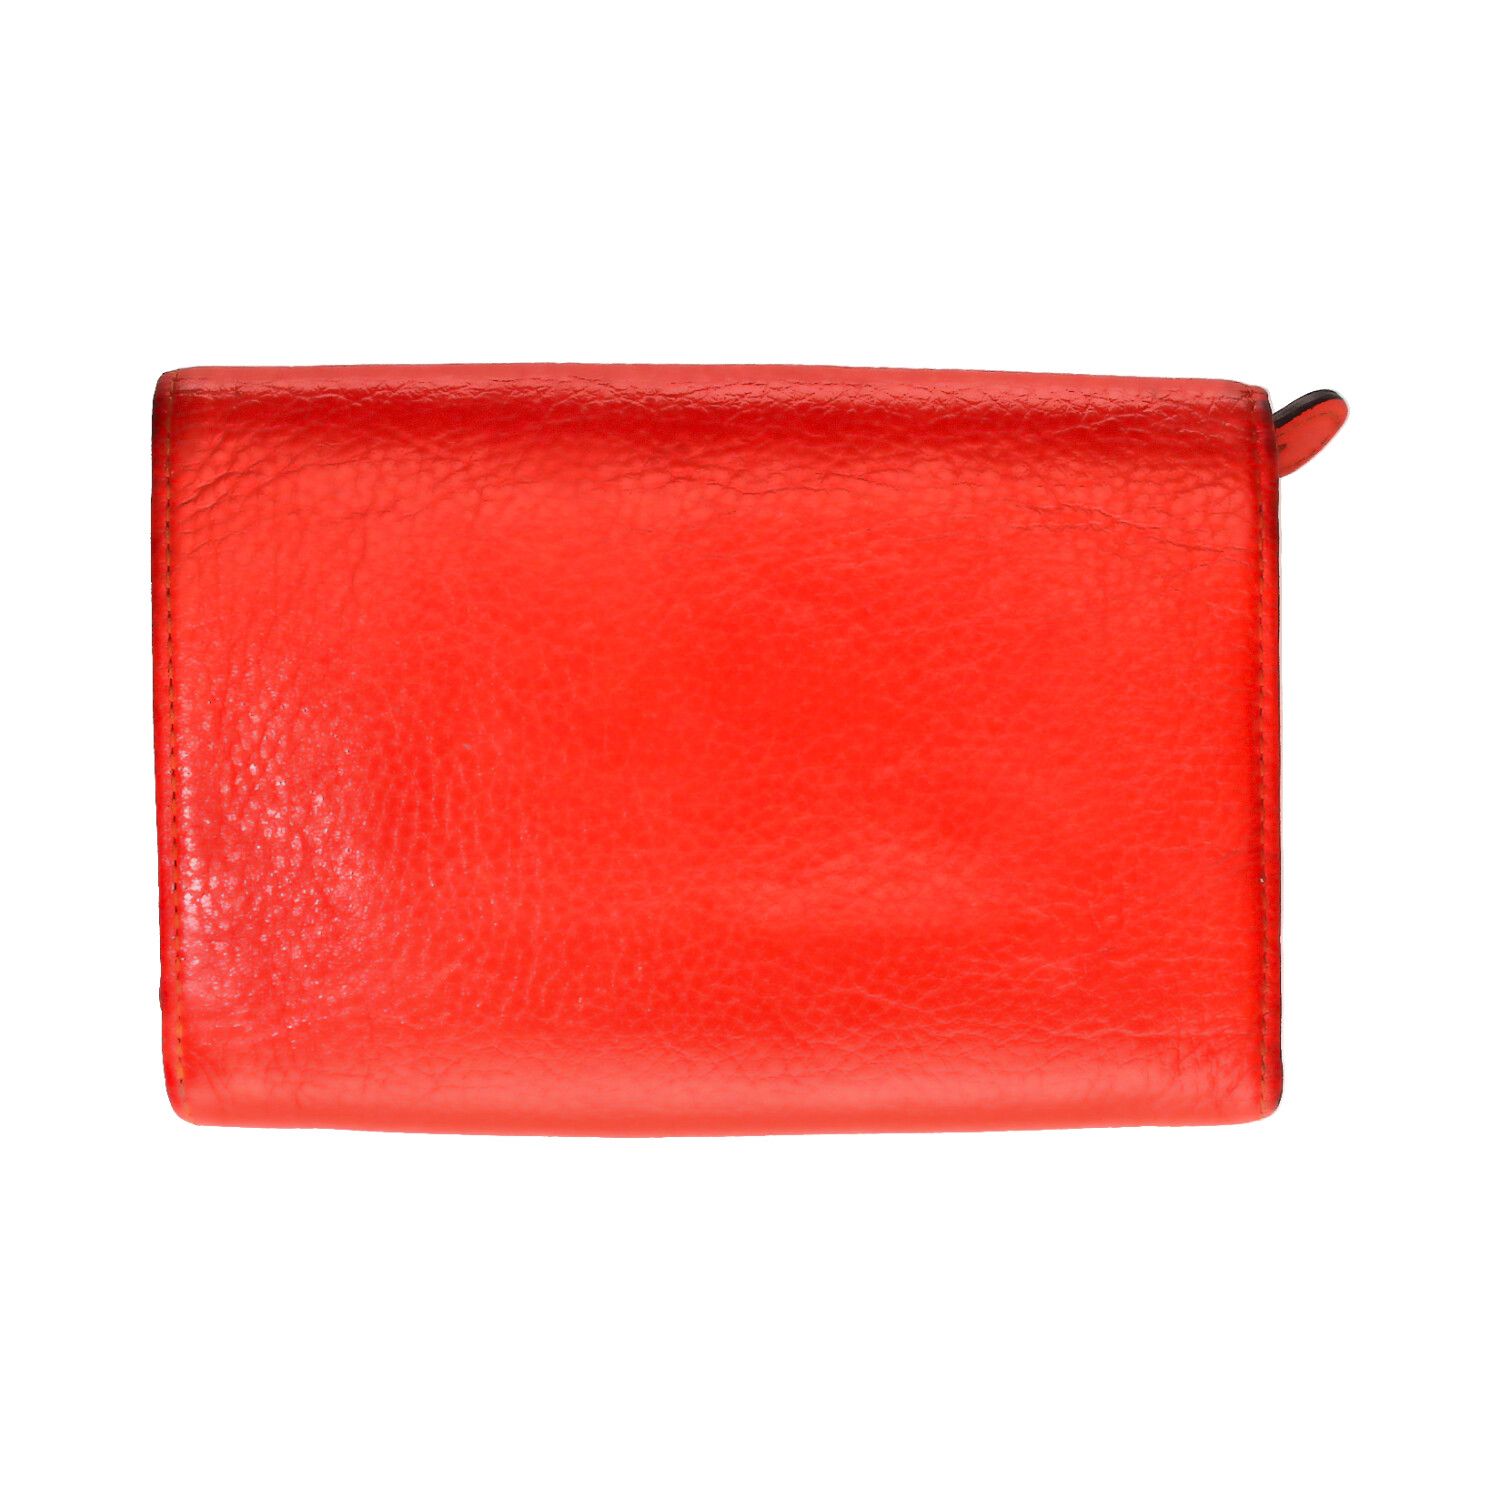 Mulberry Compact Zip Around Purse Wallet in Poppy Red Classic Small Grain -  SOLD